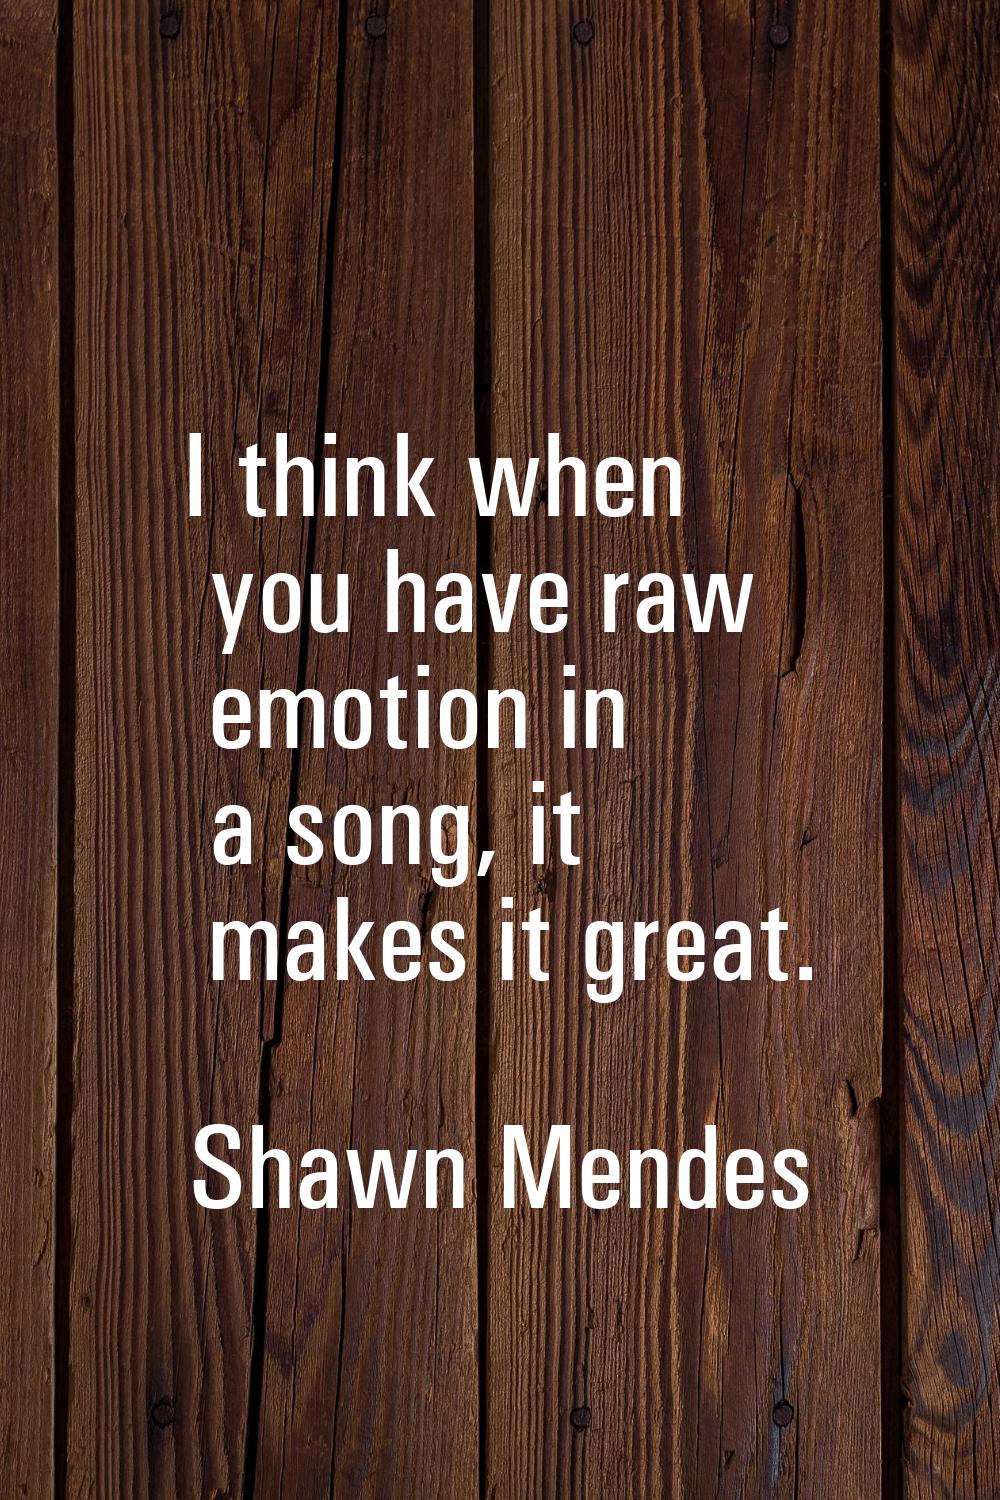 I think when you have raw emotion in a song, it makes it great.